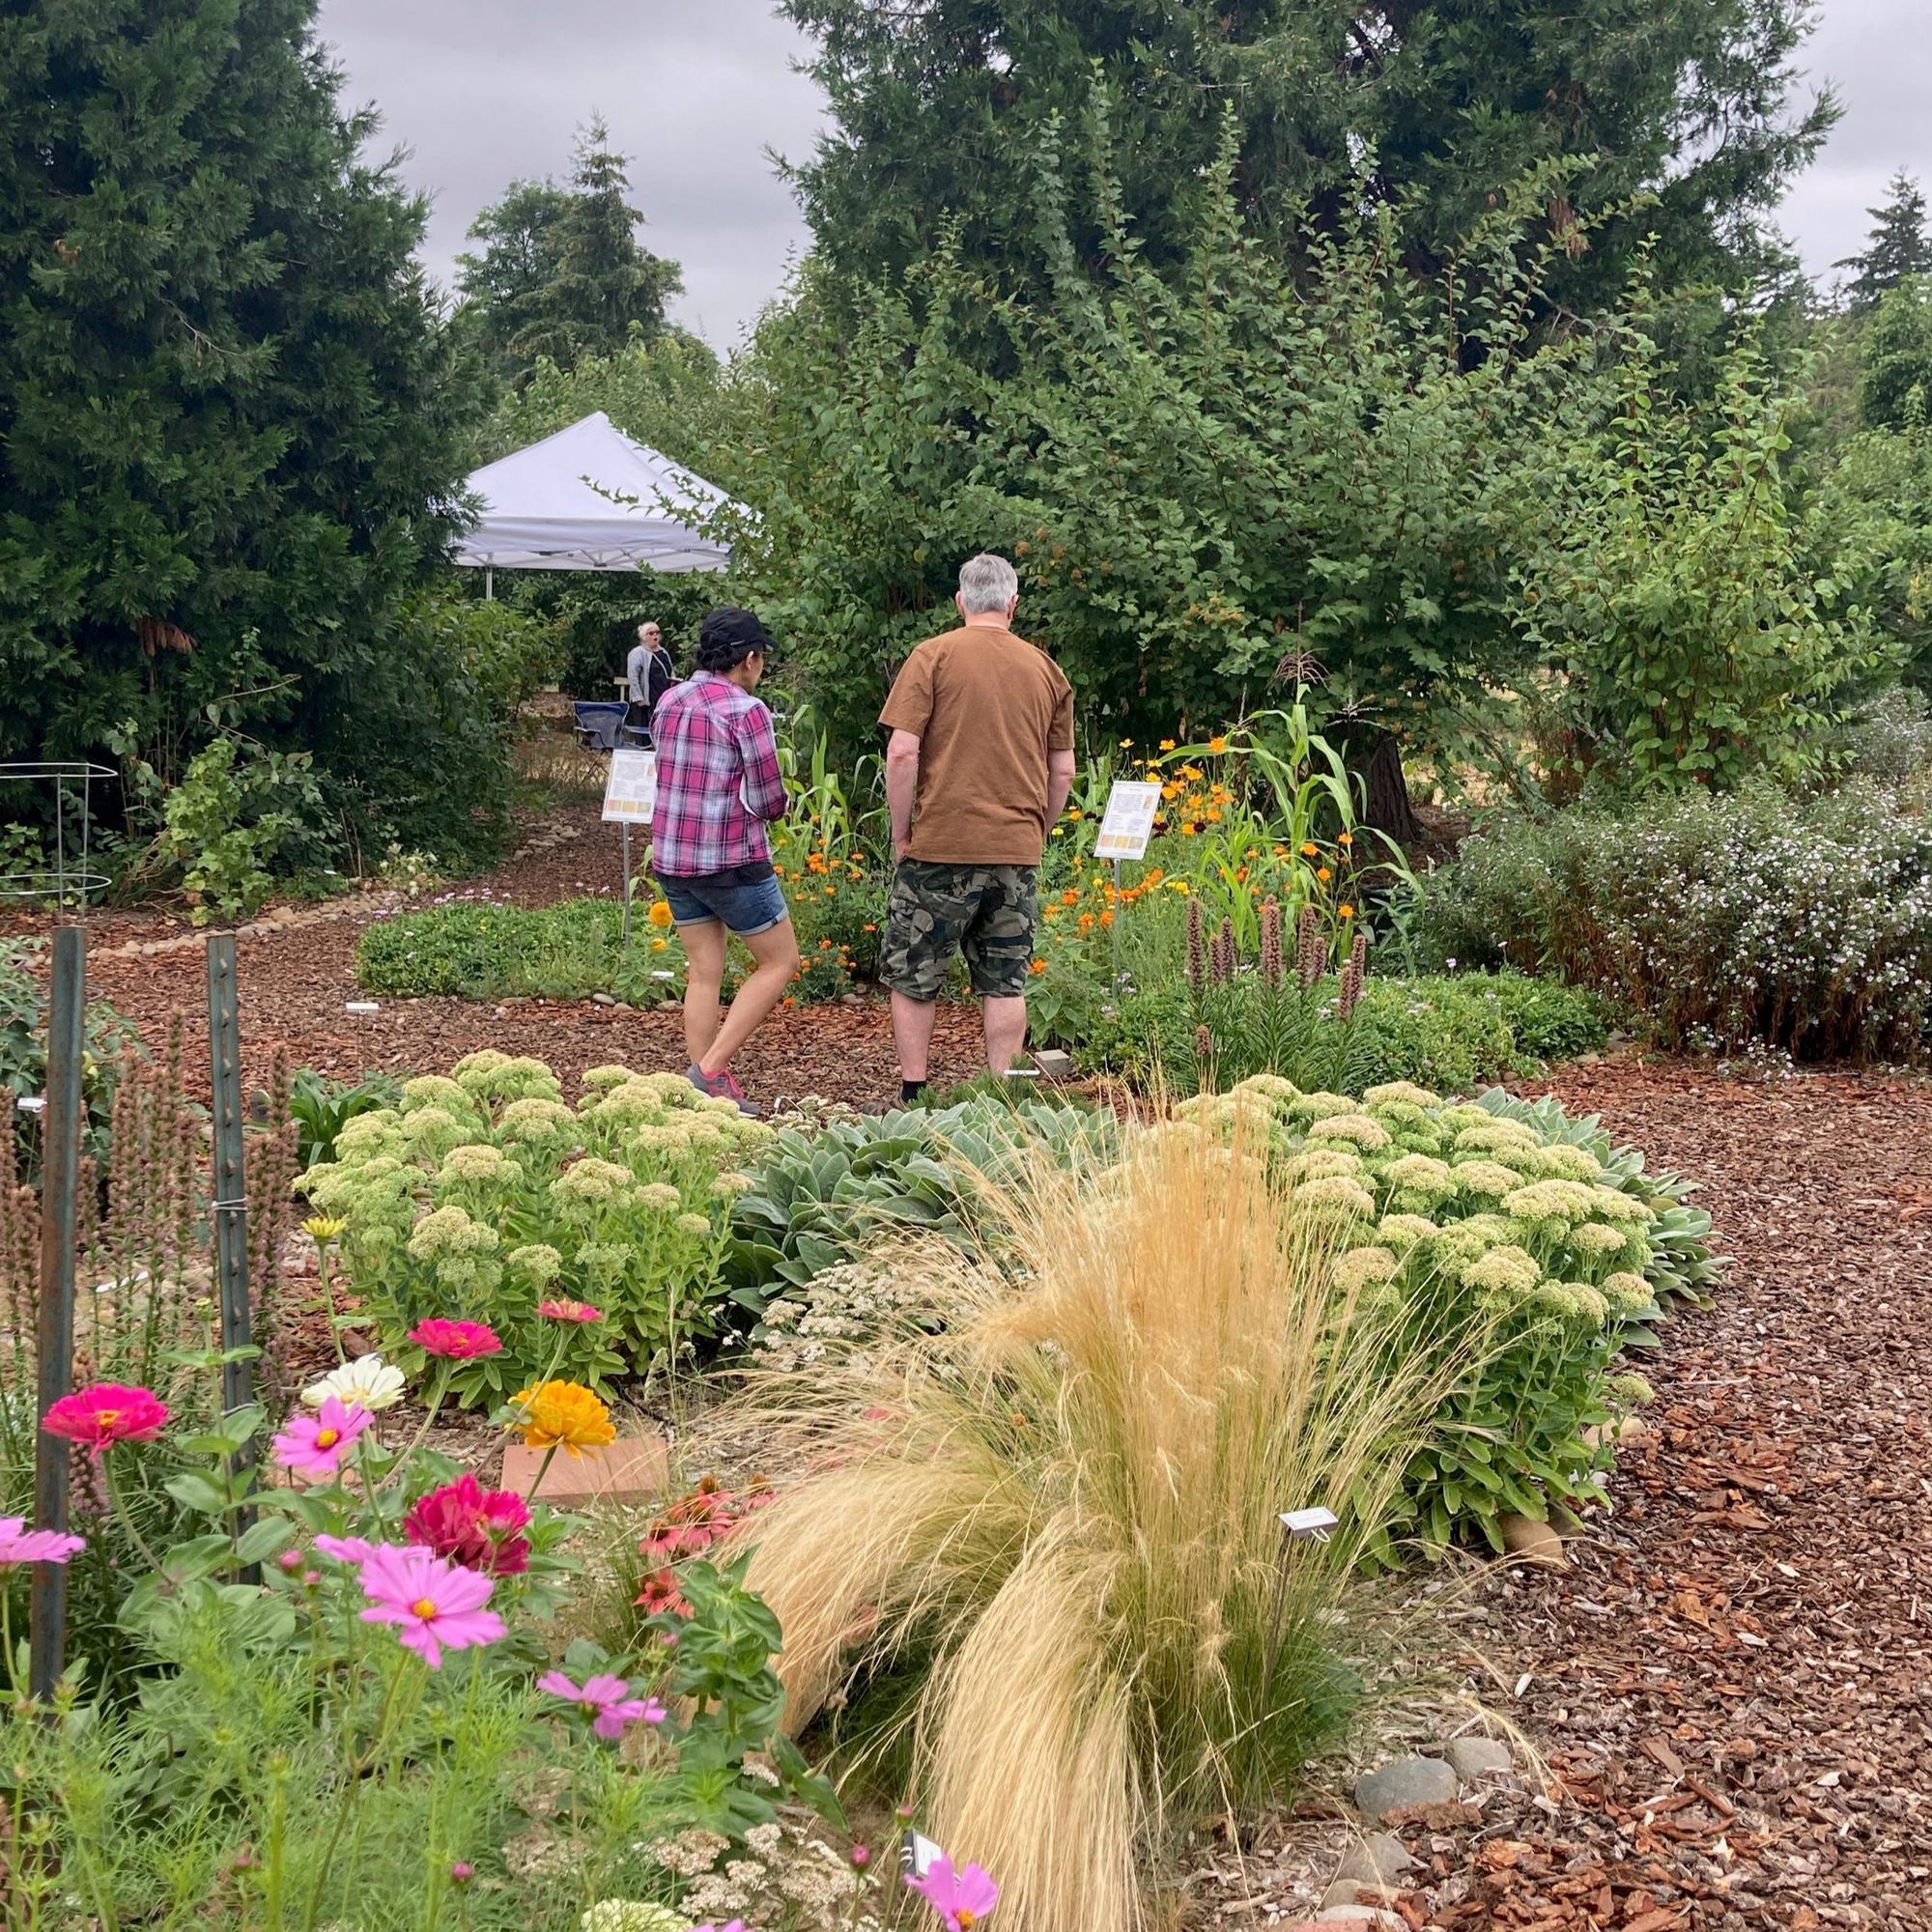 People touring a garden.